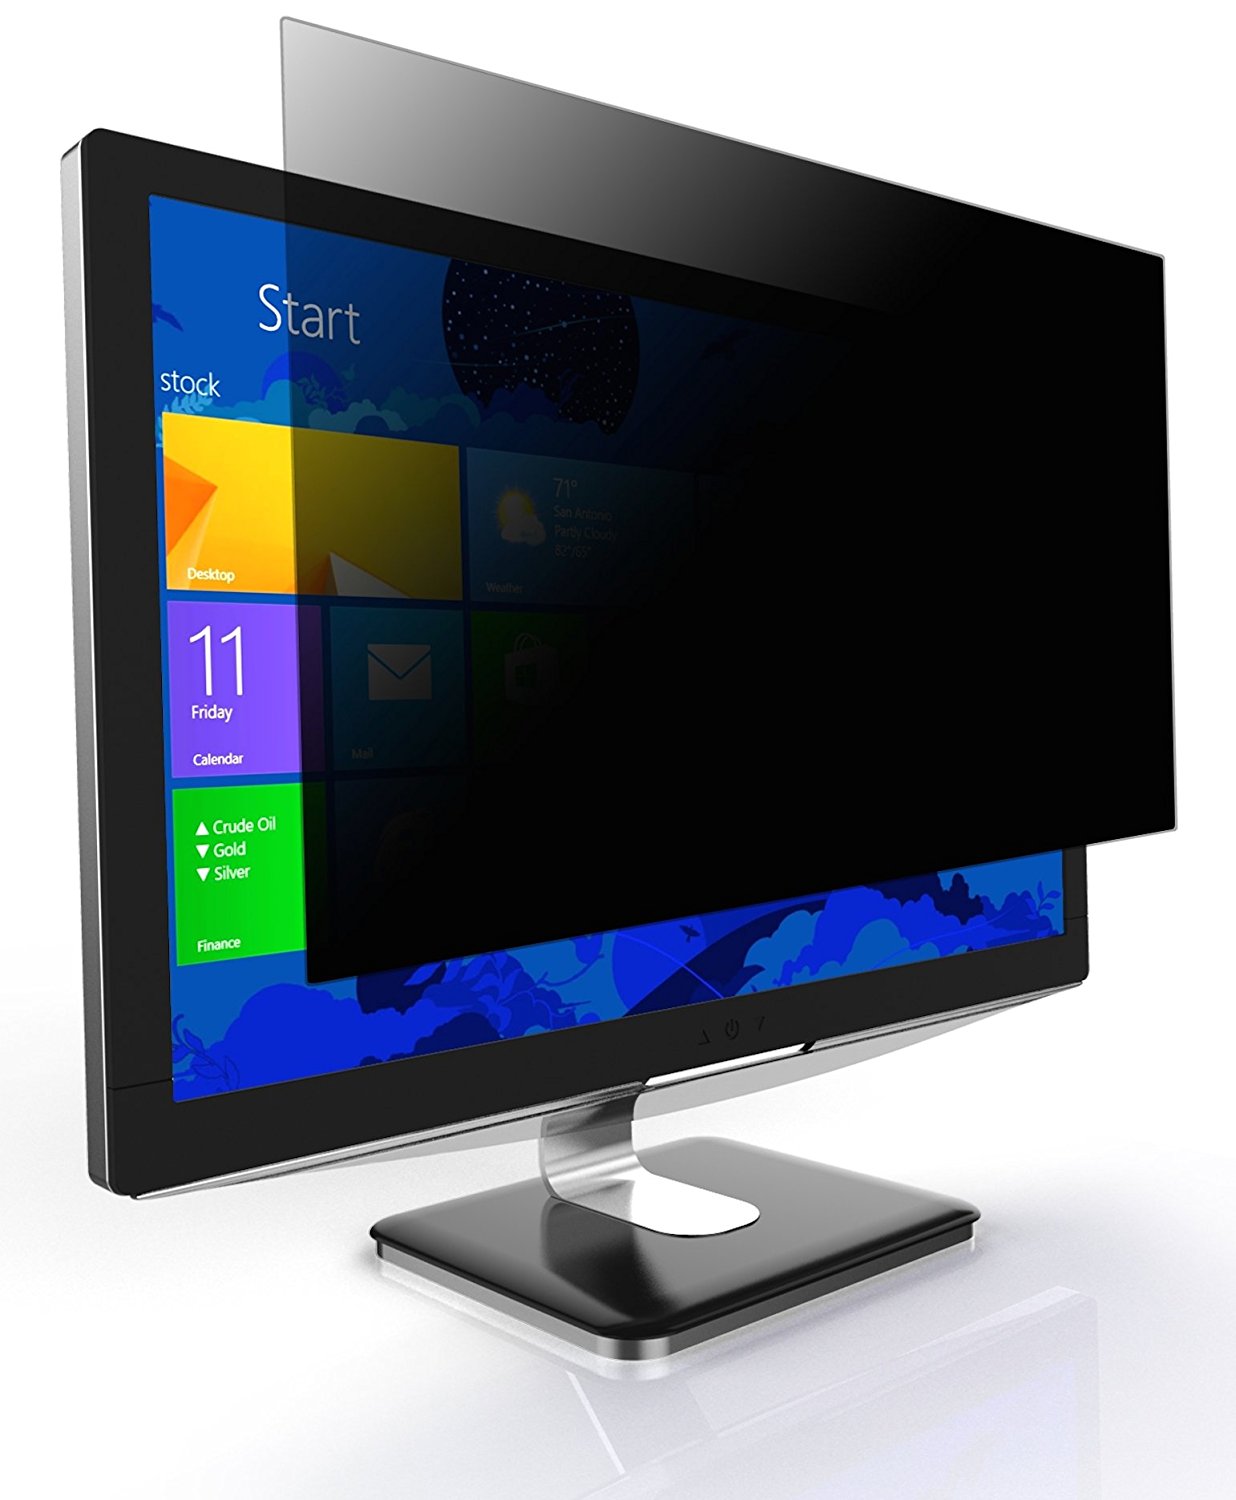 Targus Privacy Screen for 18.5" Widescreen LCD Monitors - image 3 of 3